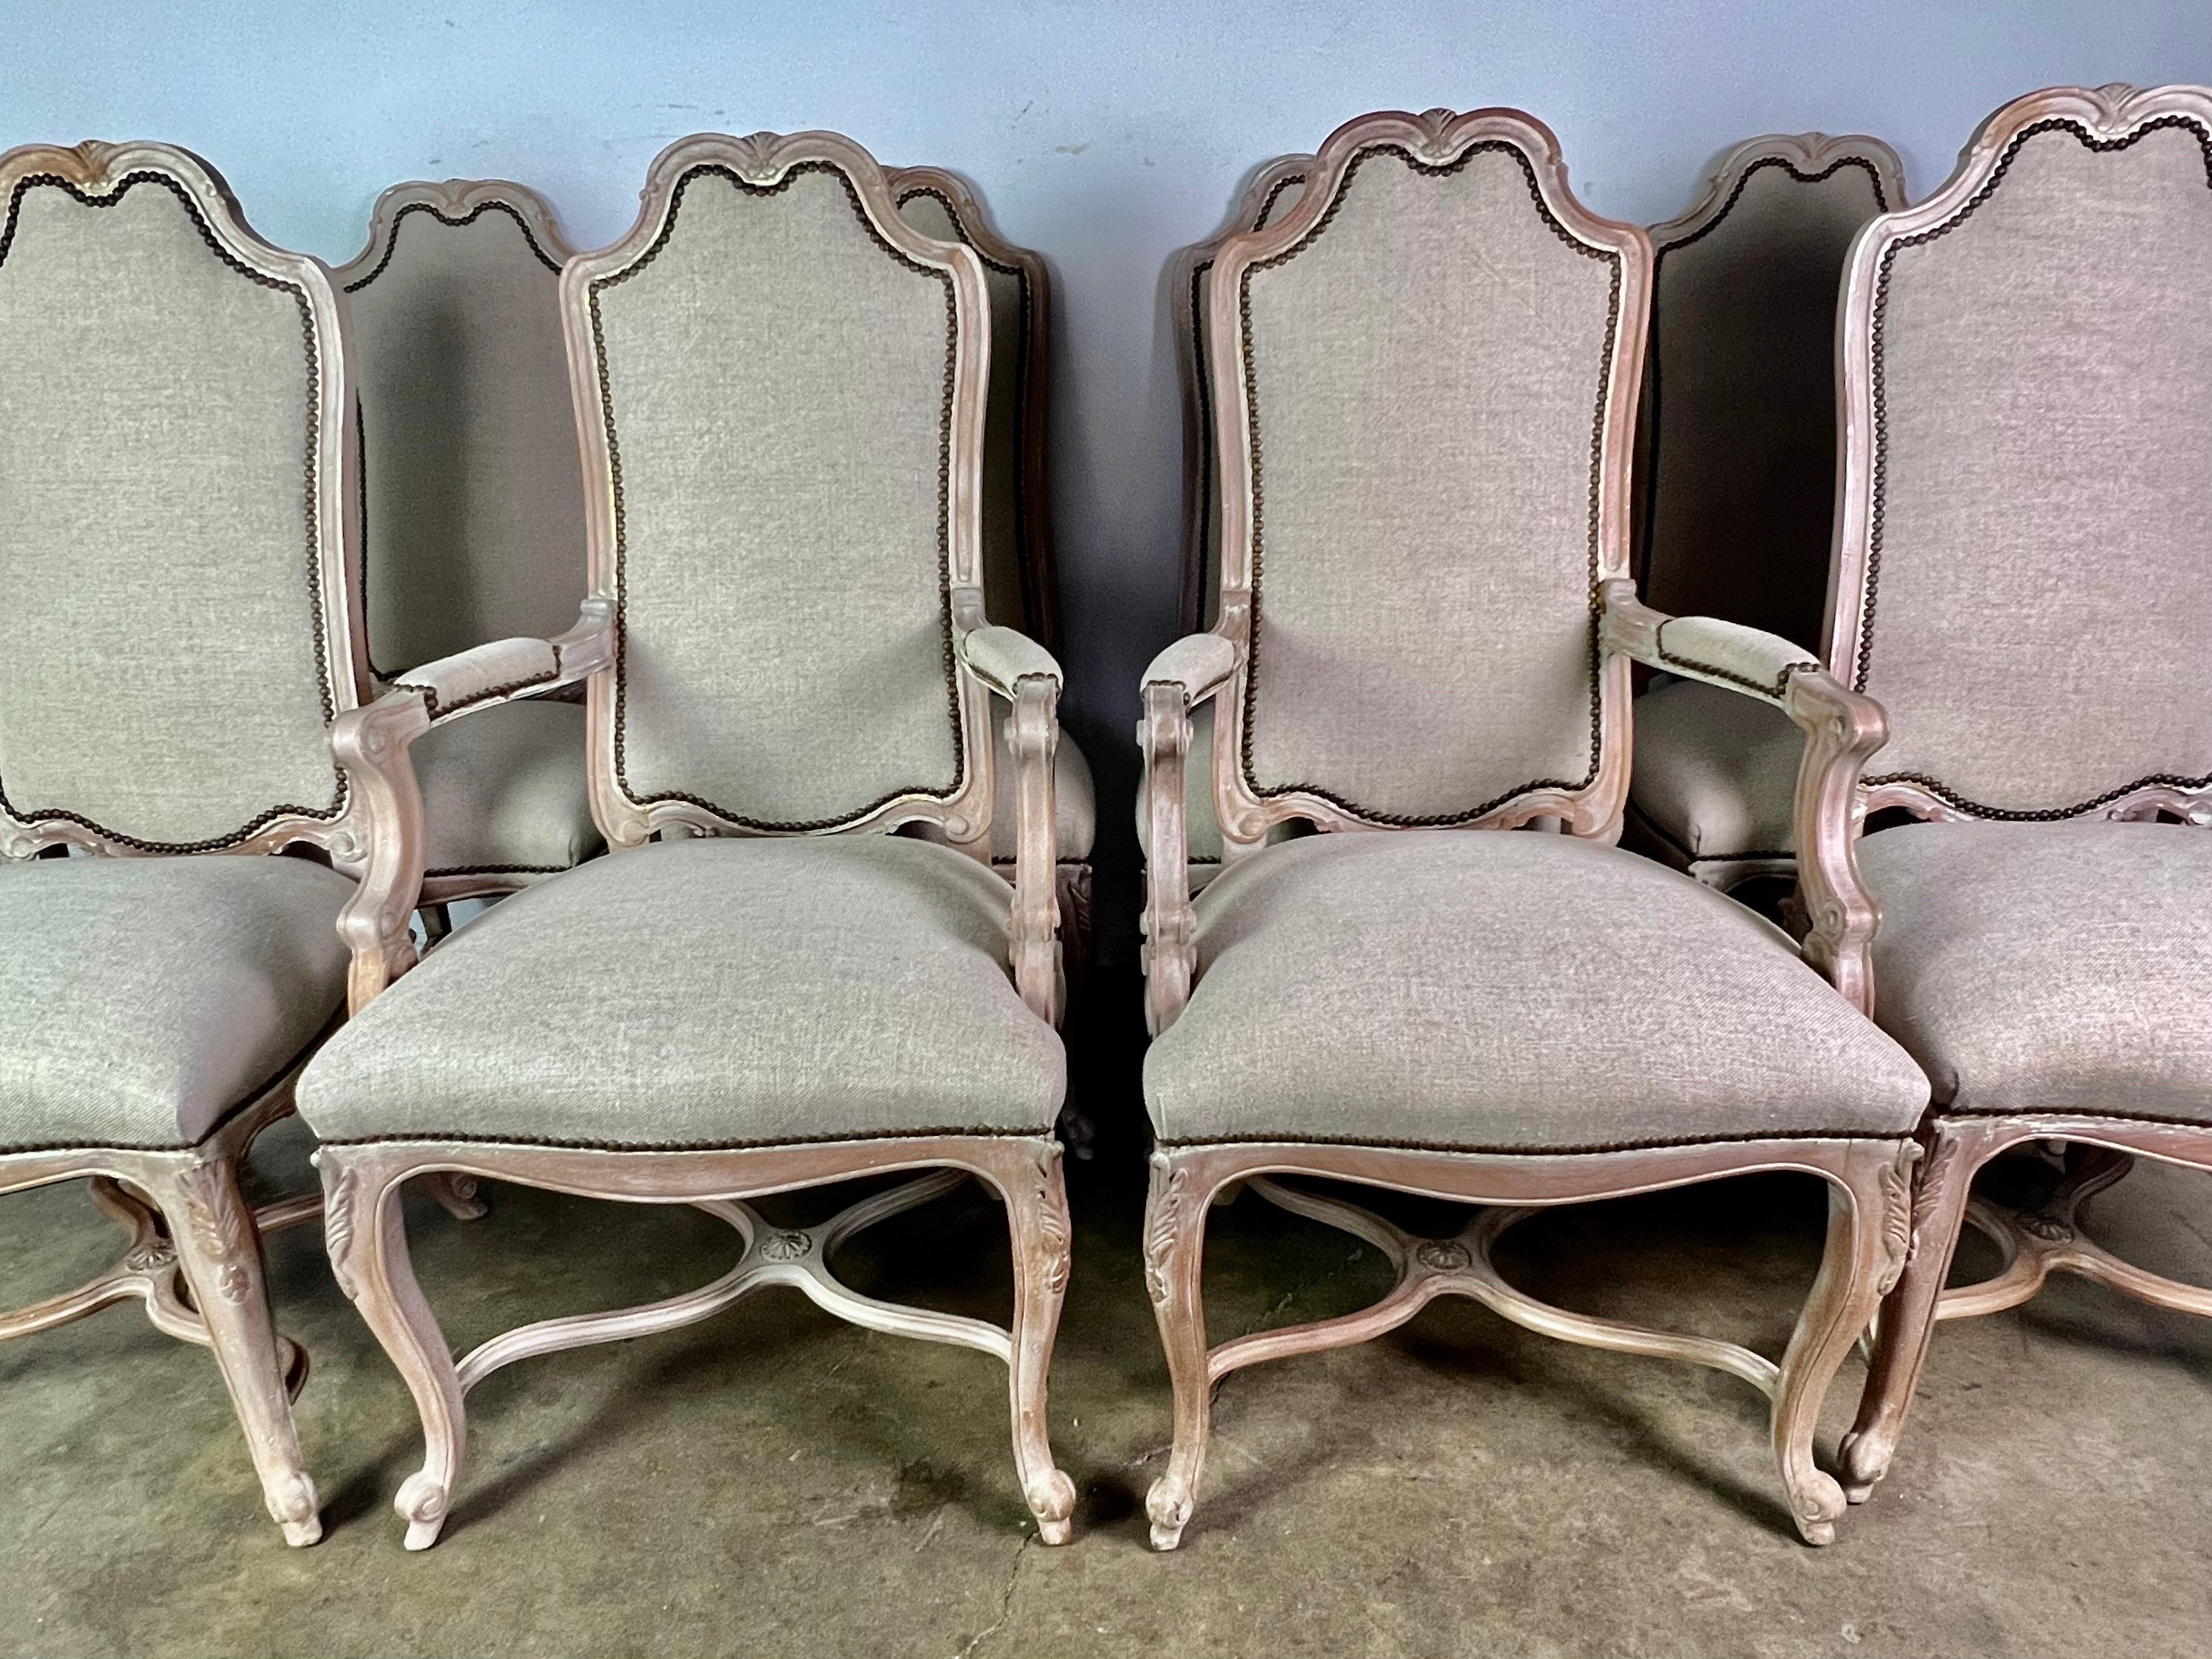 Set of (8) French Louis XV style dining chairs in a bleached walnut wood. The chairs are newly upholstered in a washed Belgium linen with nailhead trim detail. The chairs stand on four cabriole legs with rams head feet. The legs are all connected by